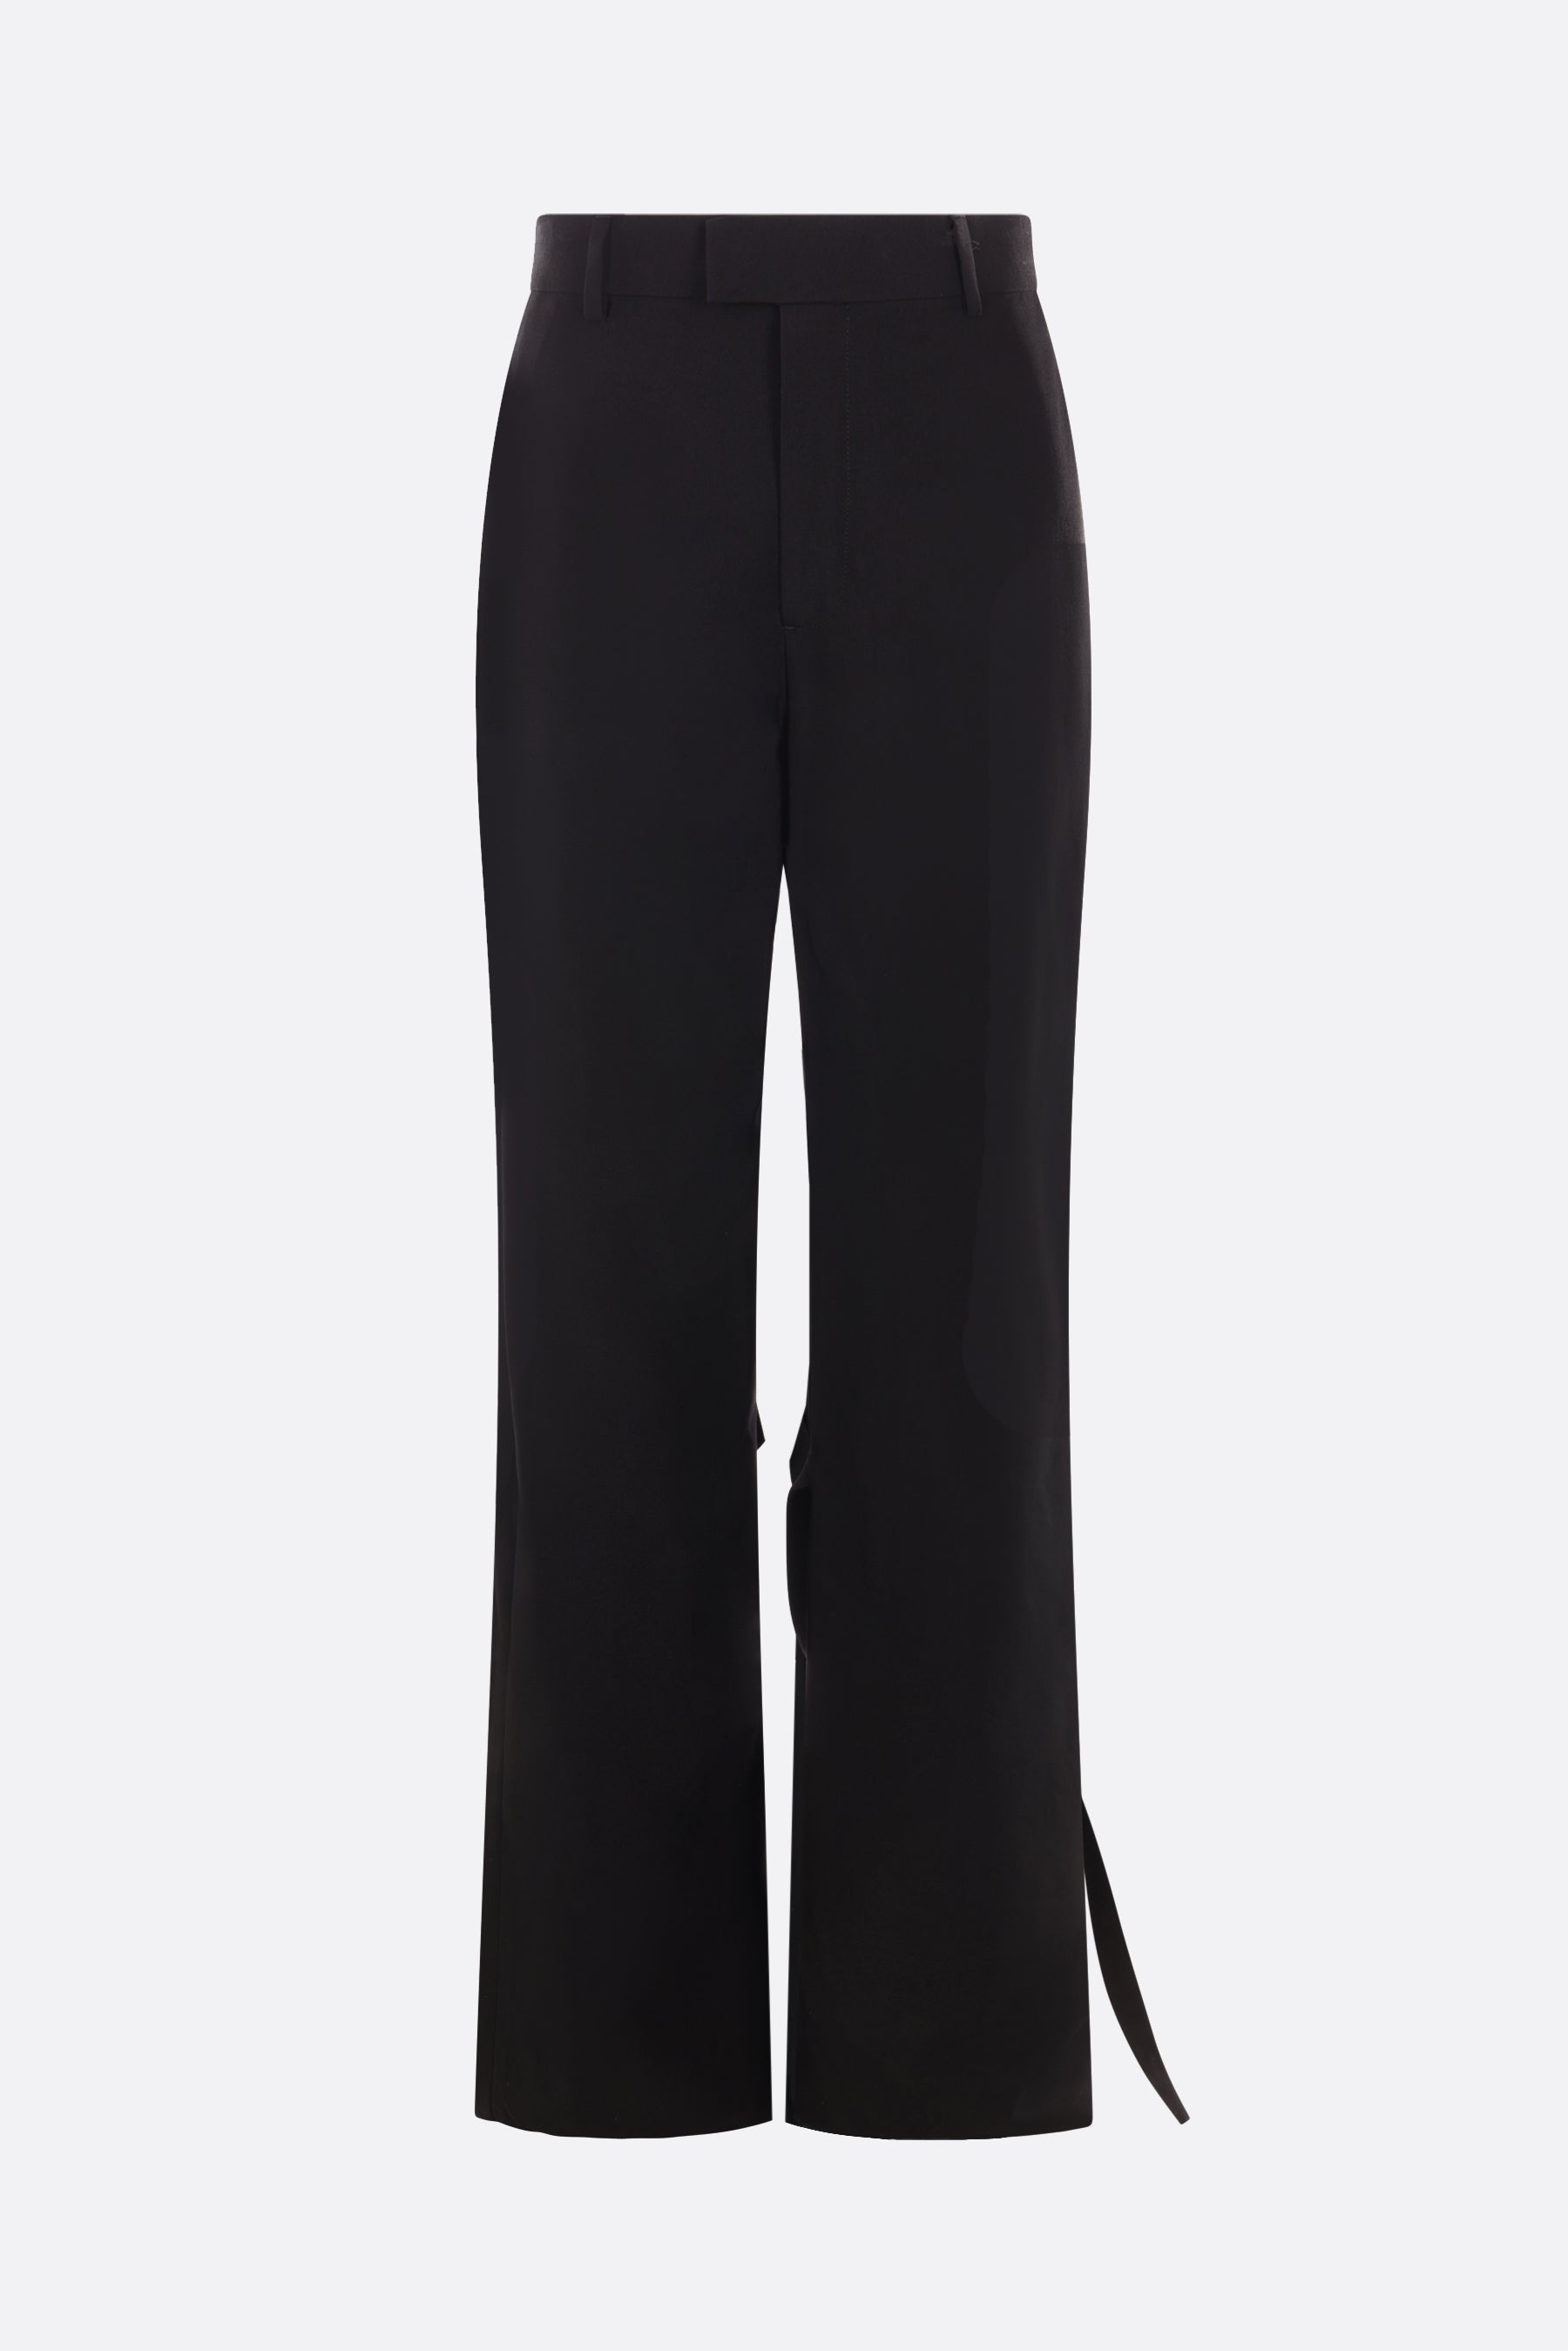 Aude viscose and silk relaxed-fit pants